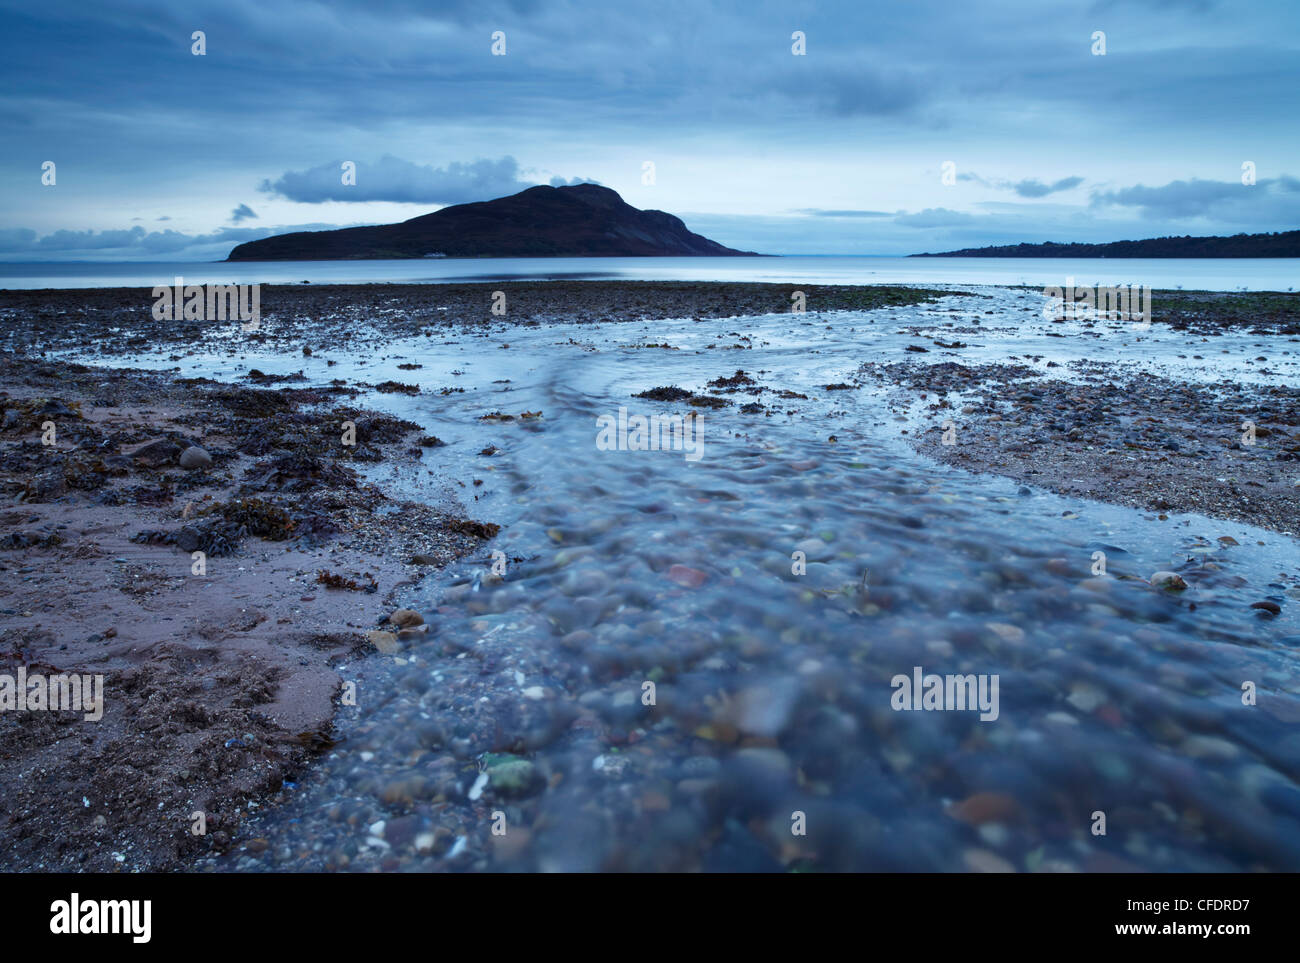 An October morning at Lamlash bay on the Isle of Arran looking across the sea to Holy Island, Scotland, United Kingdom, Europe Stock Photo